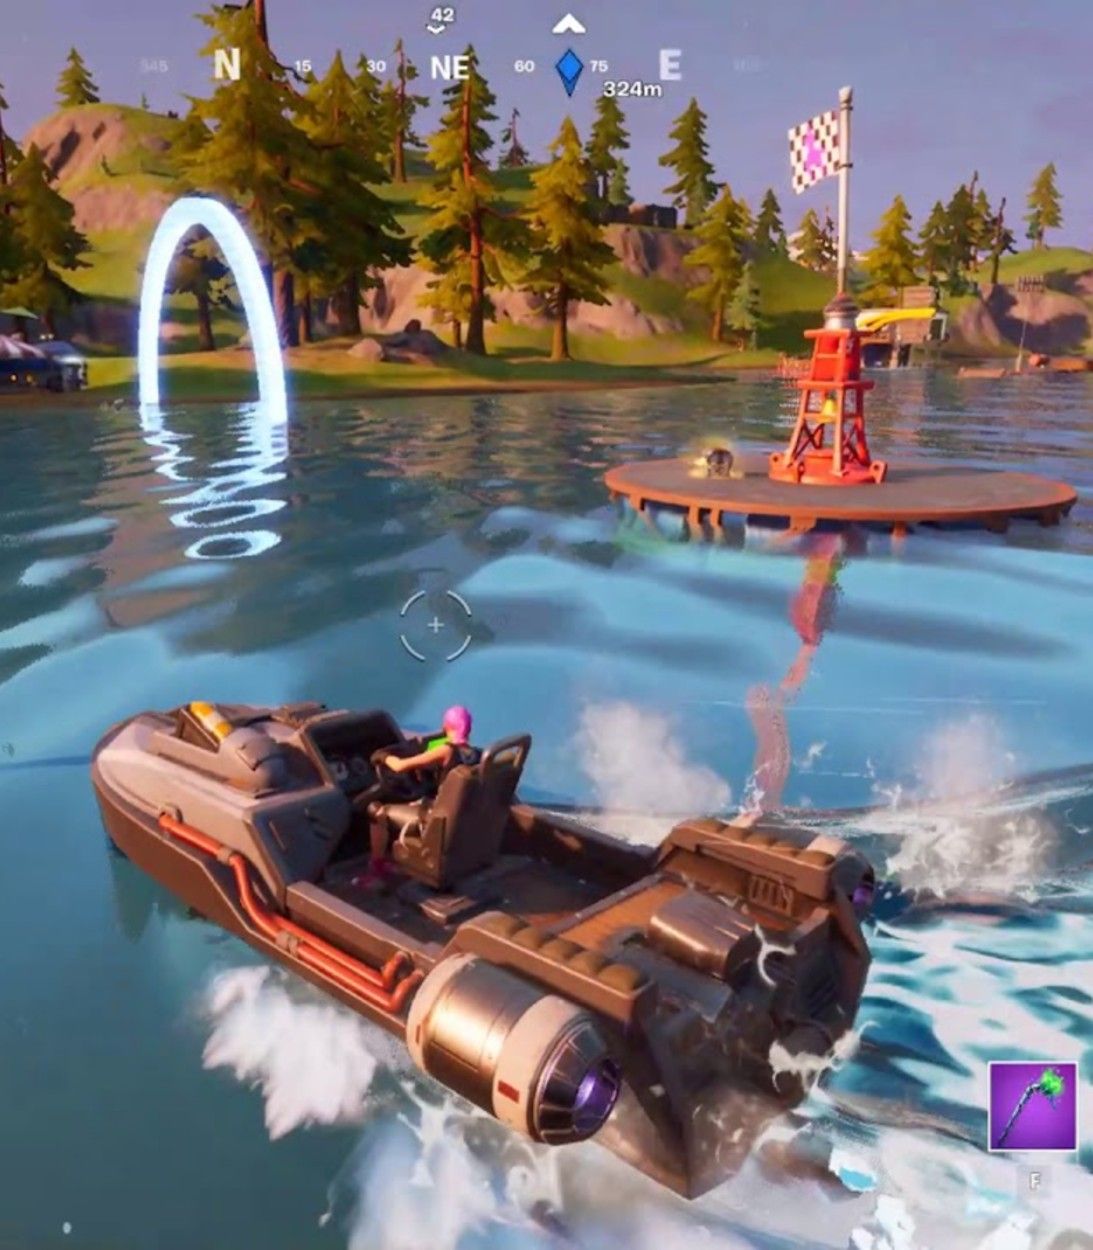 A player completes a Time Trial lap at Motorboat Mayhem in Fortnite Season 3